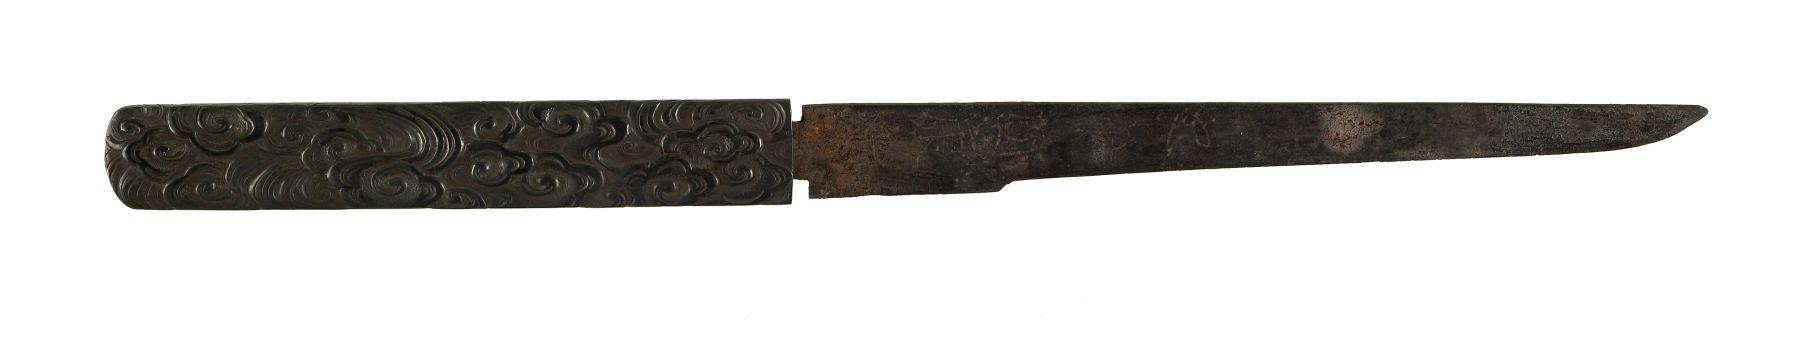 Image for Kozuka with Clouds